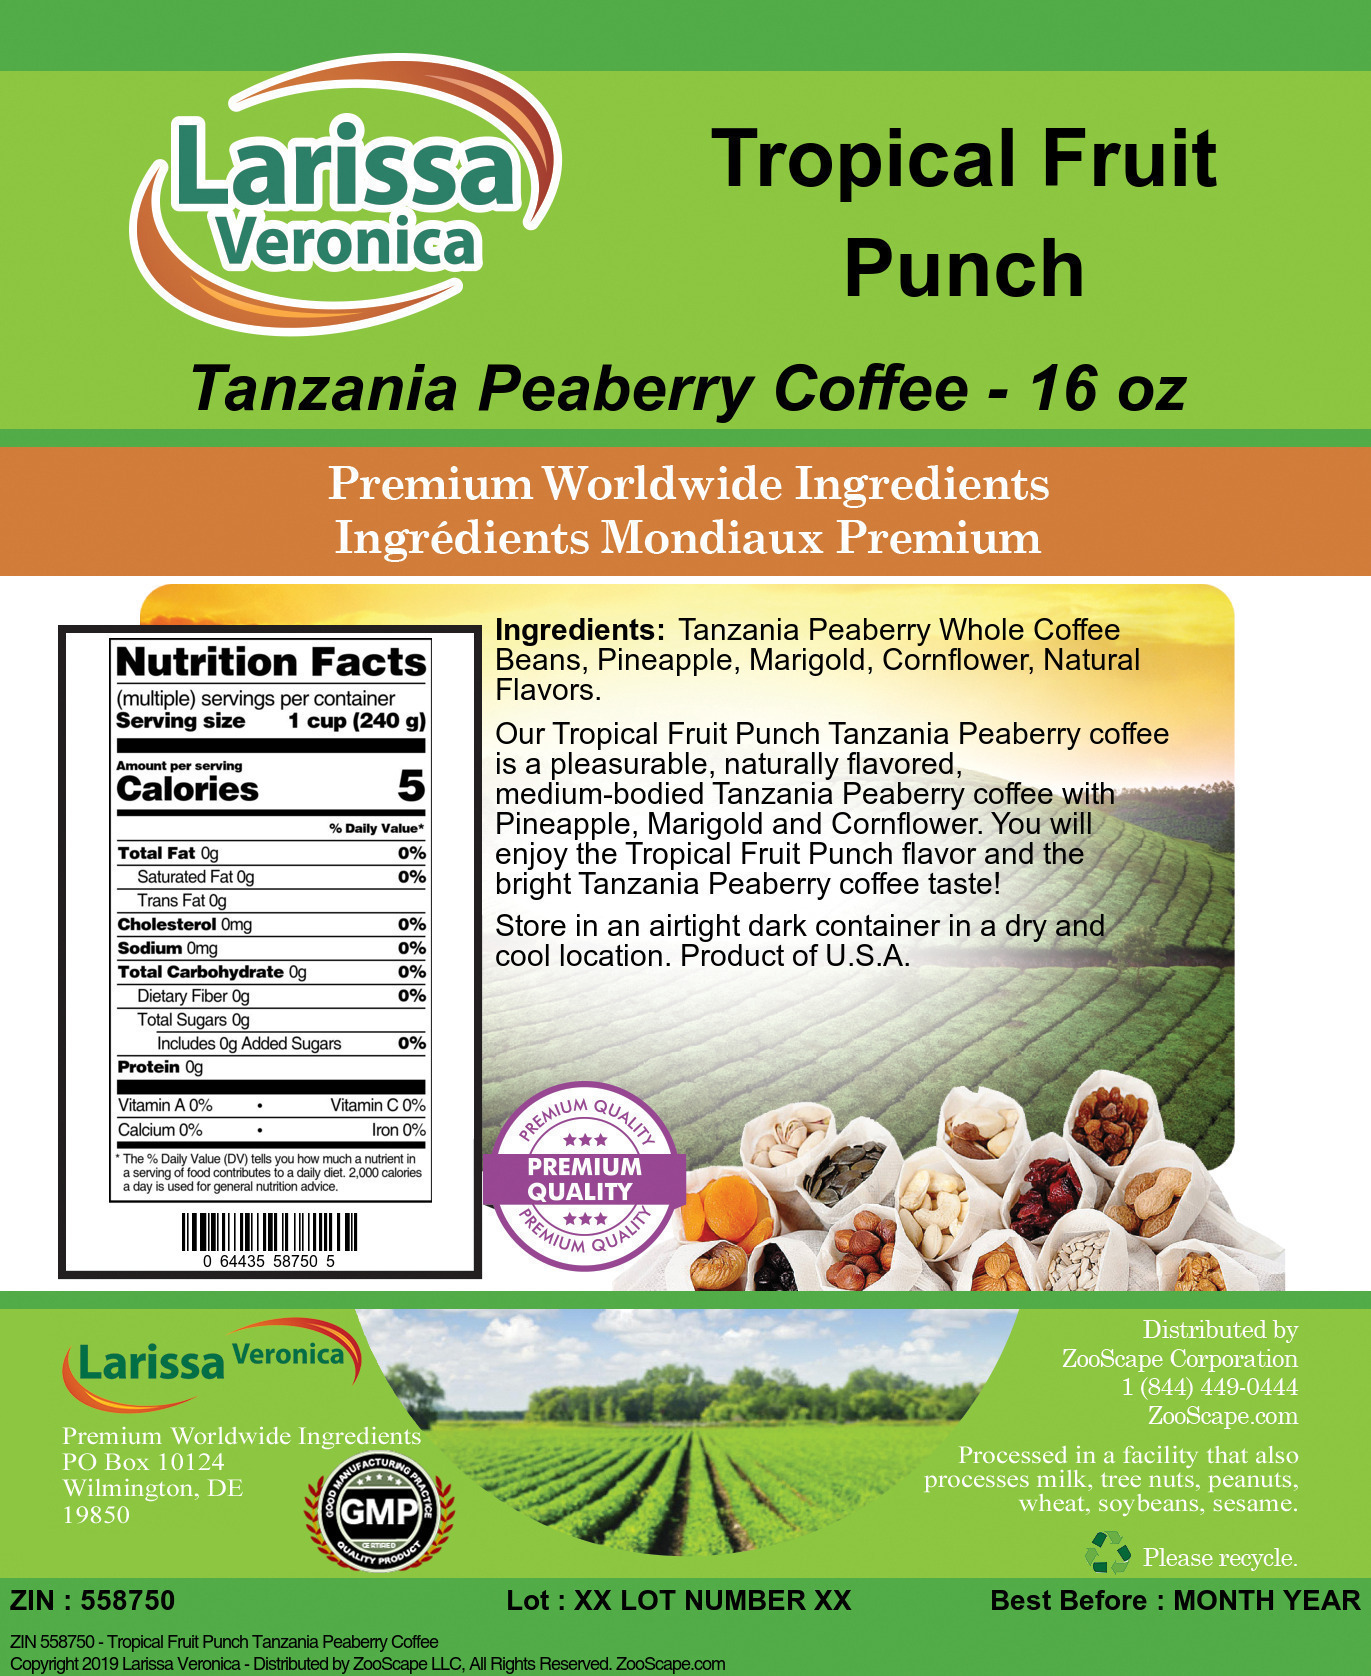 Tropical Fruit Punch Tanzania Peaberry Coffee - Label